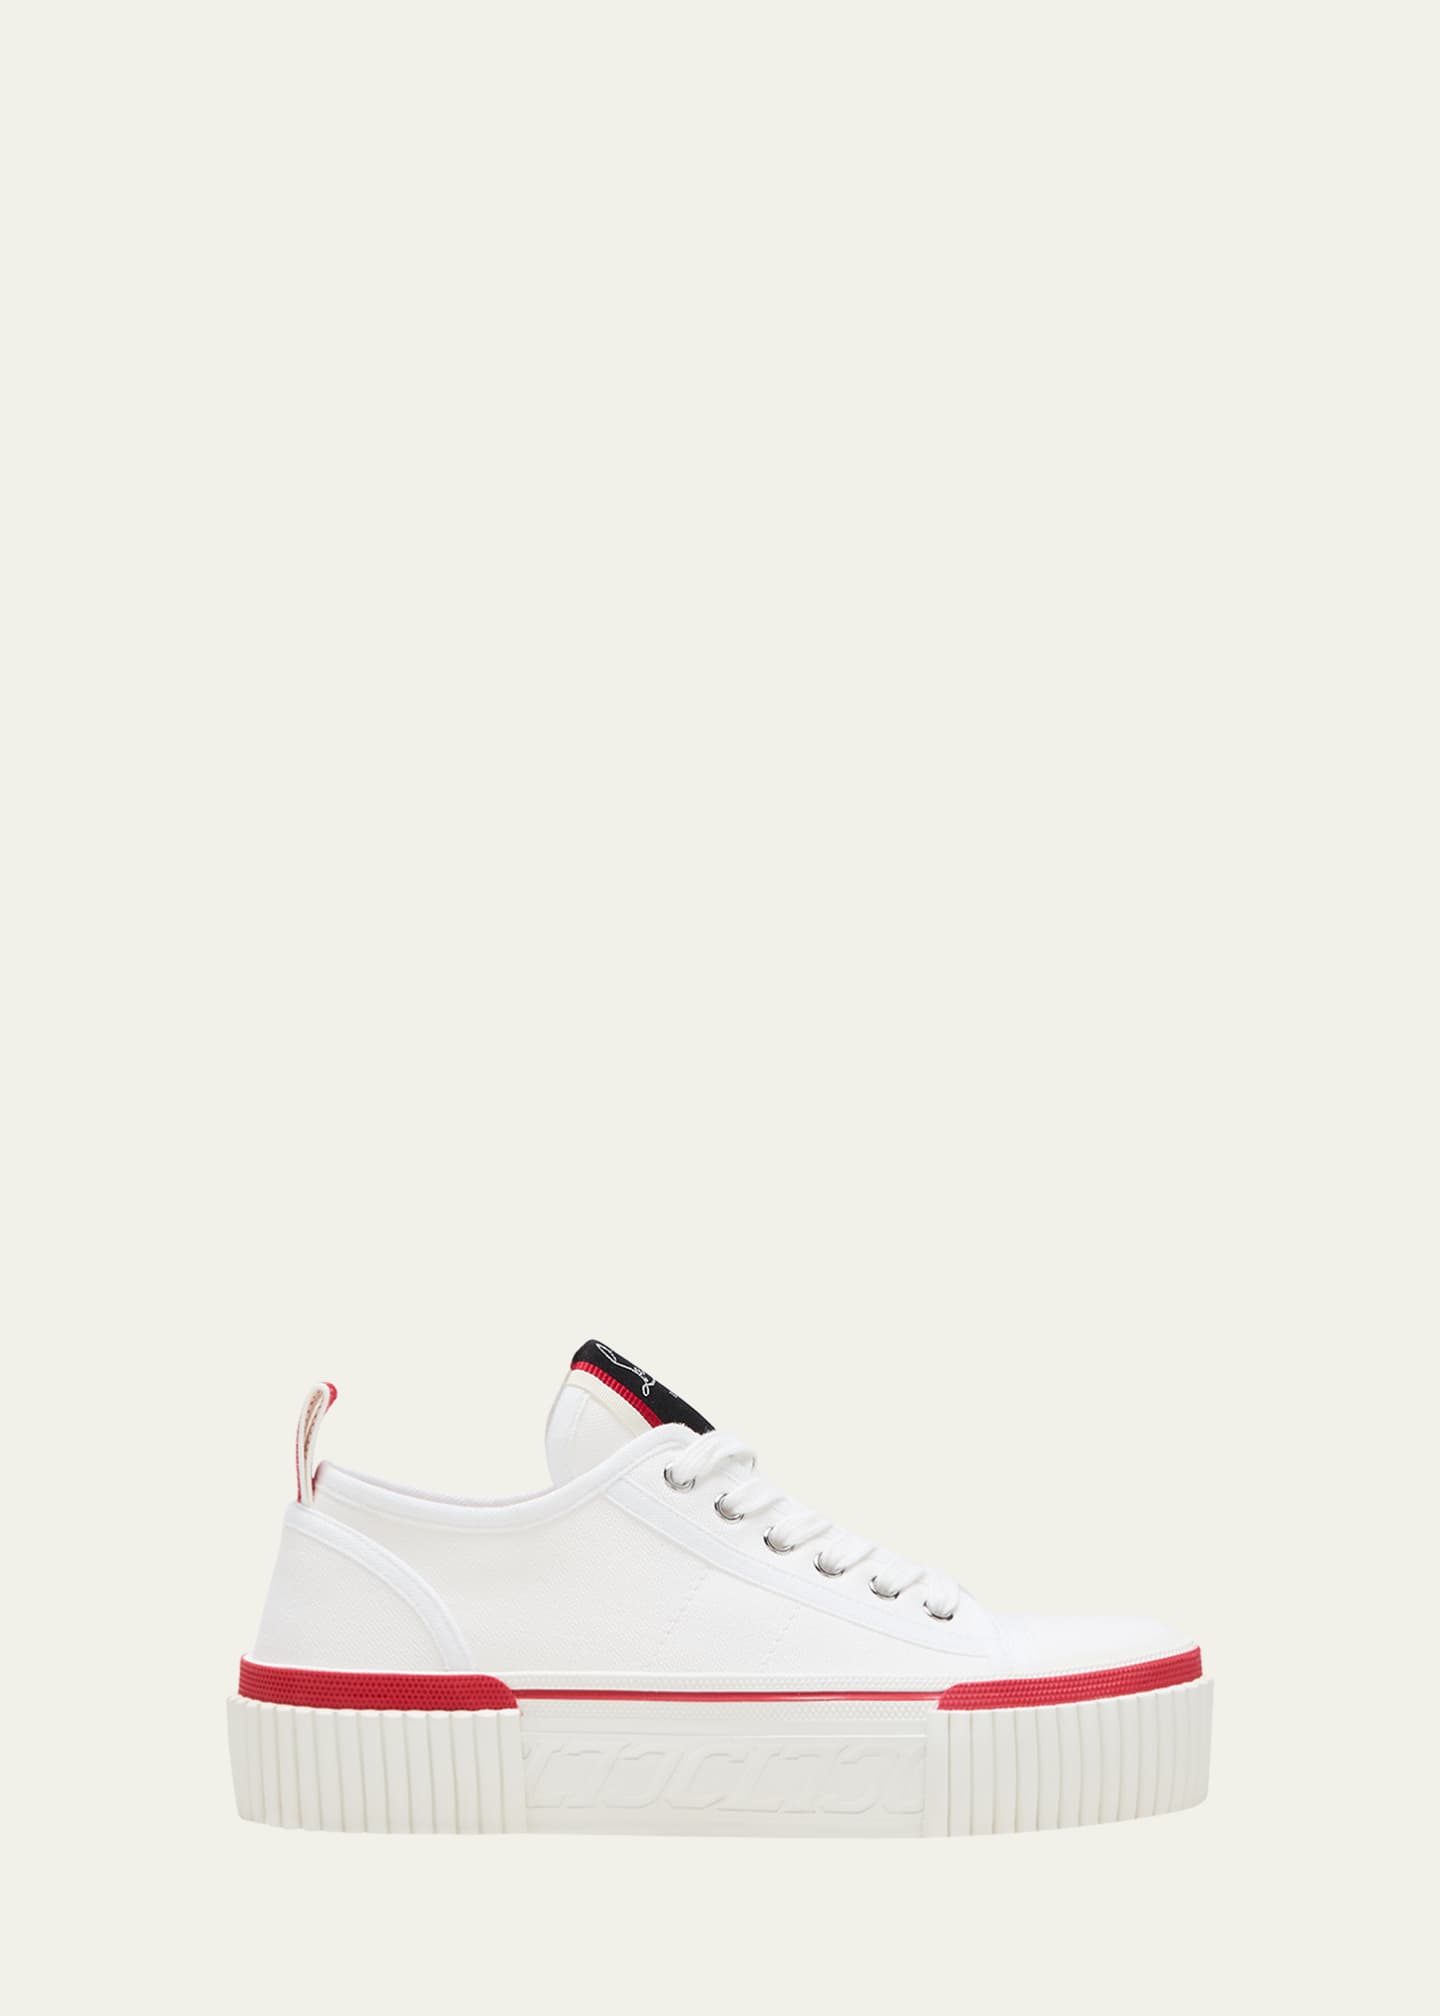 Christian Louboutin Super Pedro Low-Top Red Sole Sneakers - Bergdorf ...